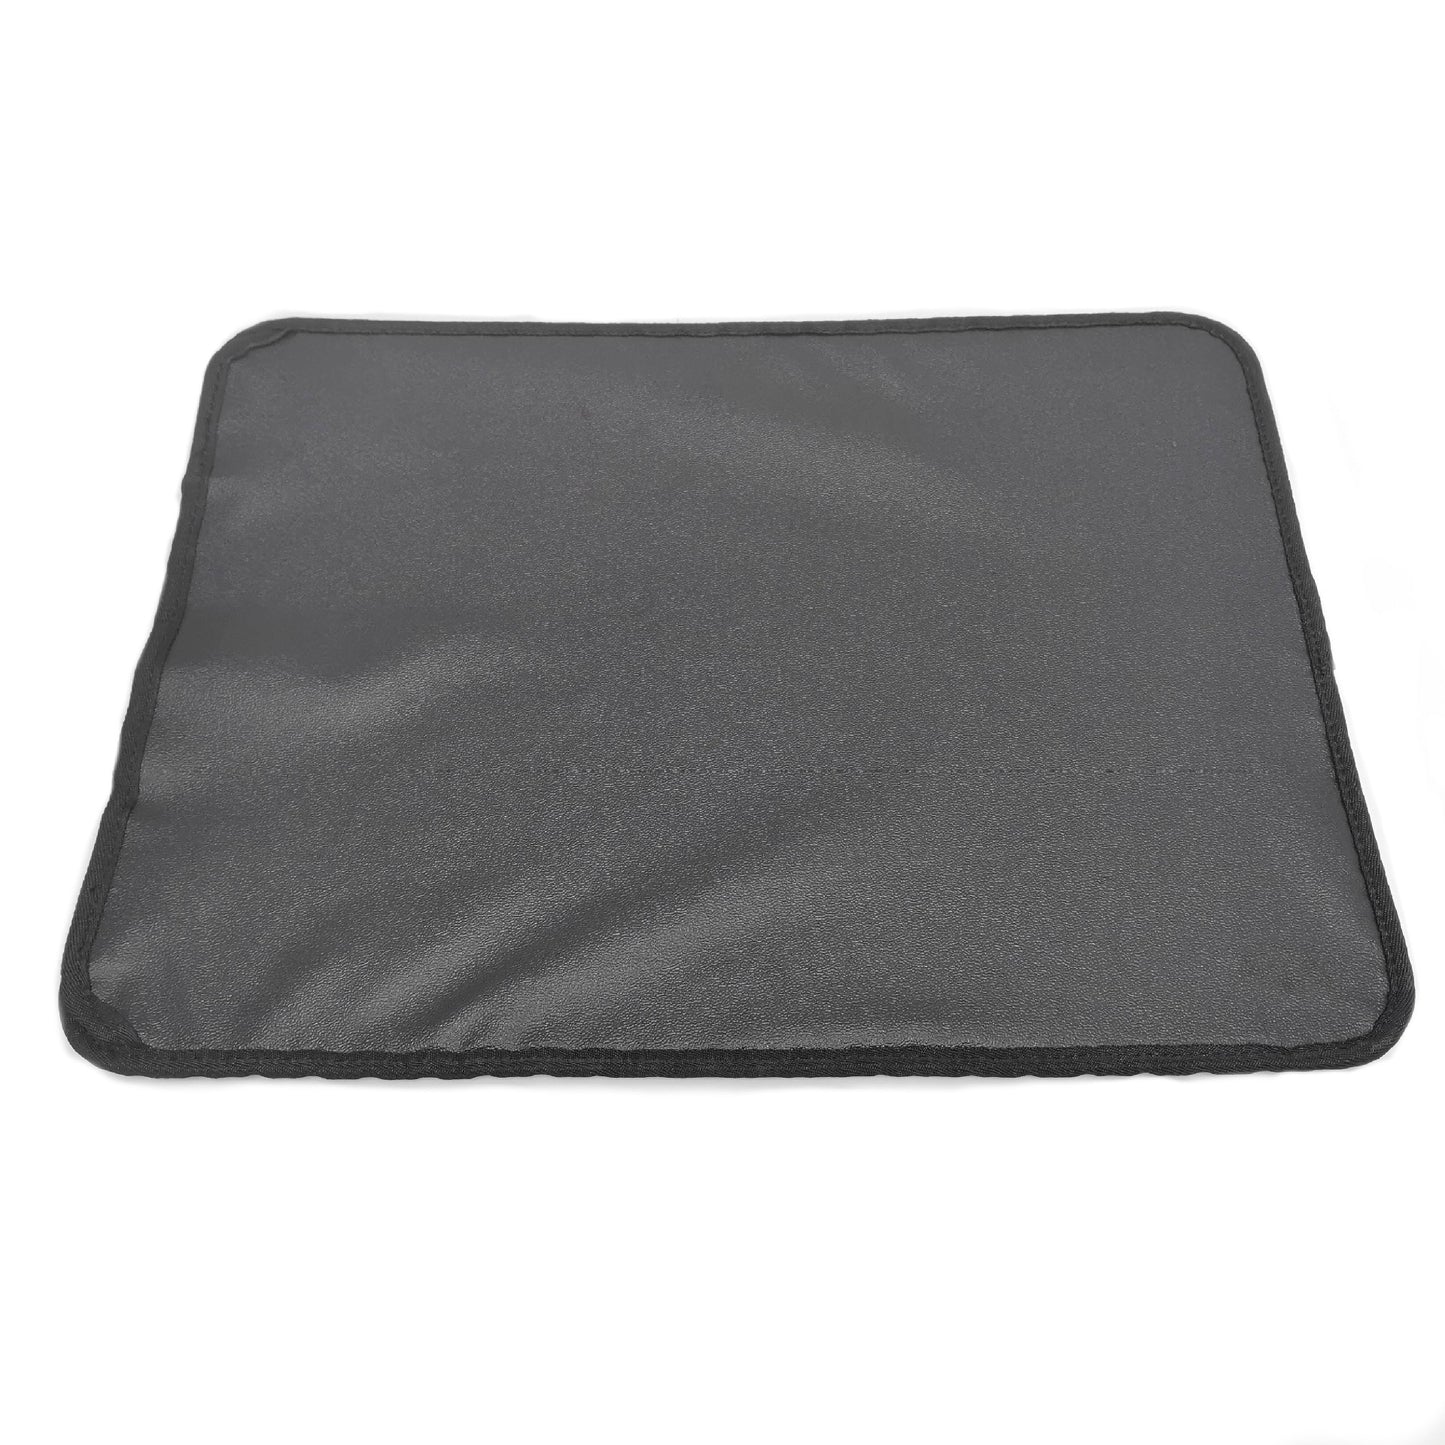 Pieviev Double Layer Waterproof Urine-Proof Trapping Mat for Cats: One Pack